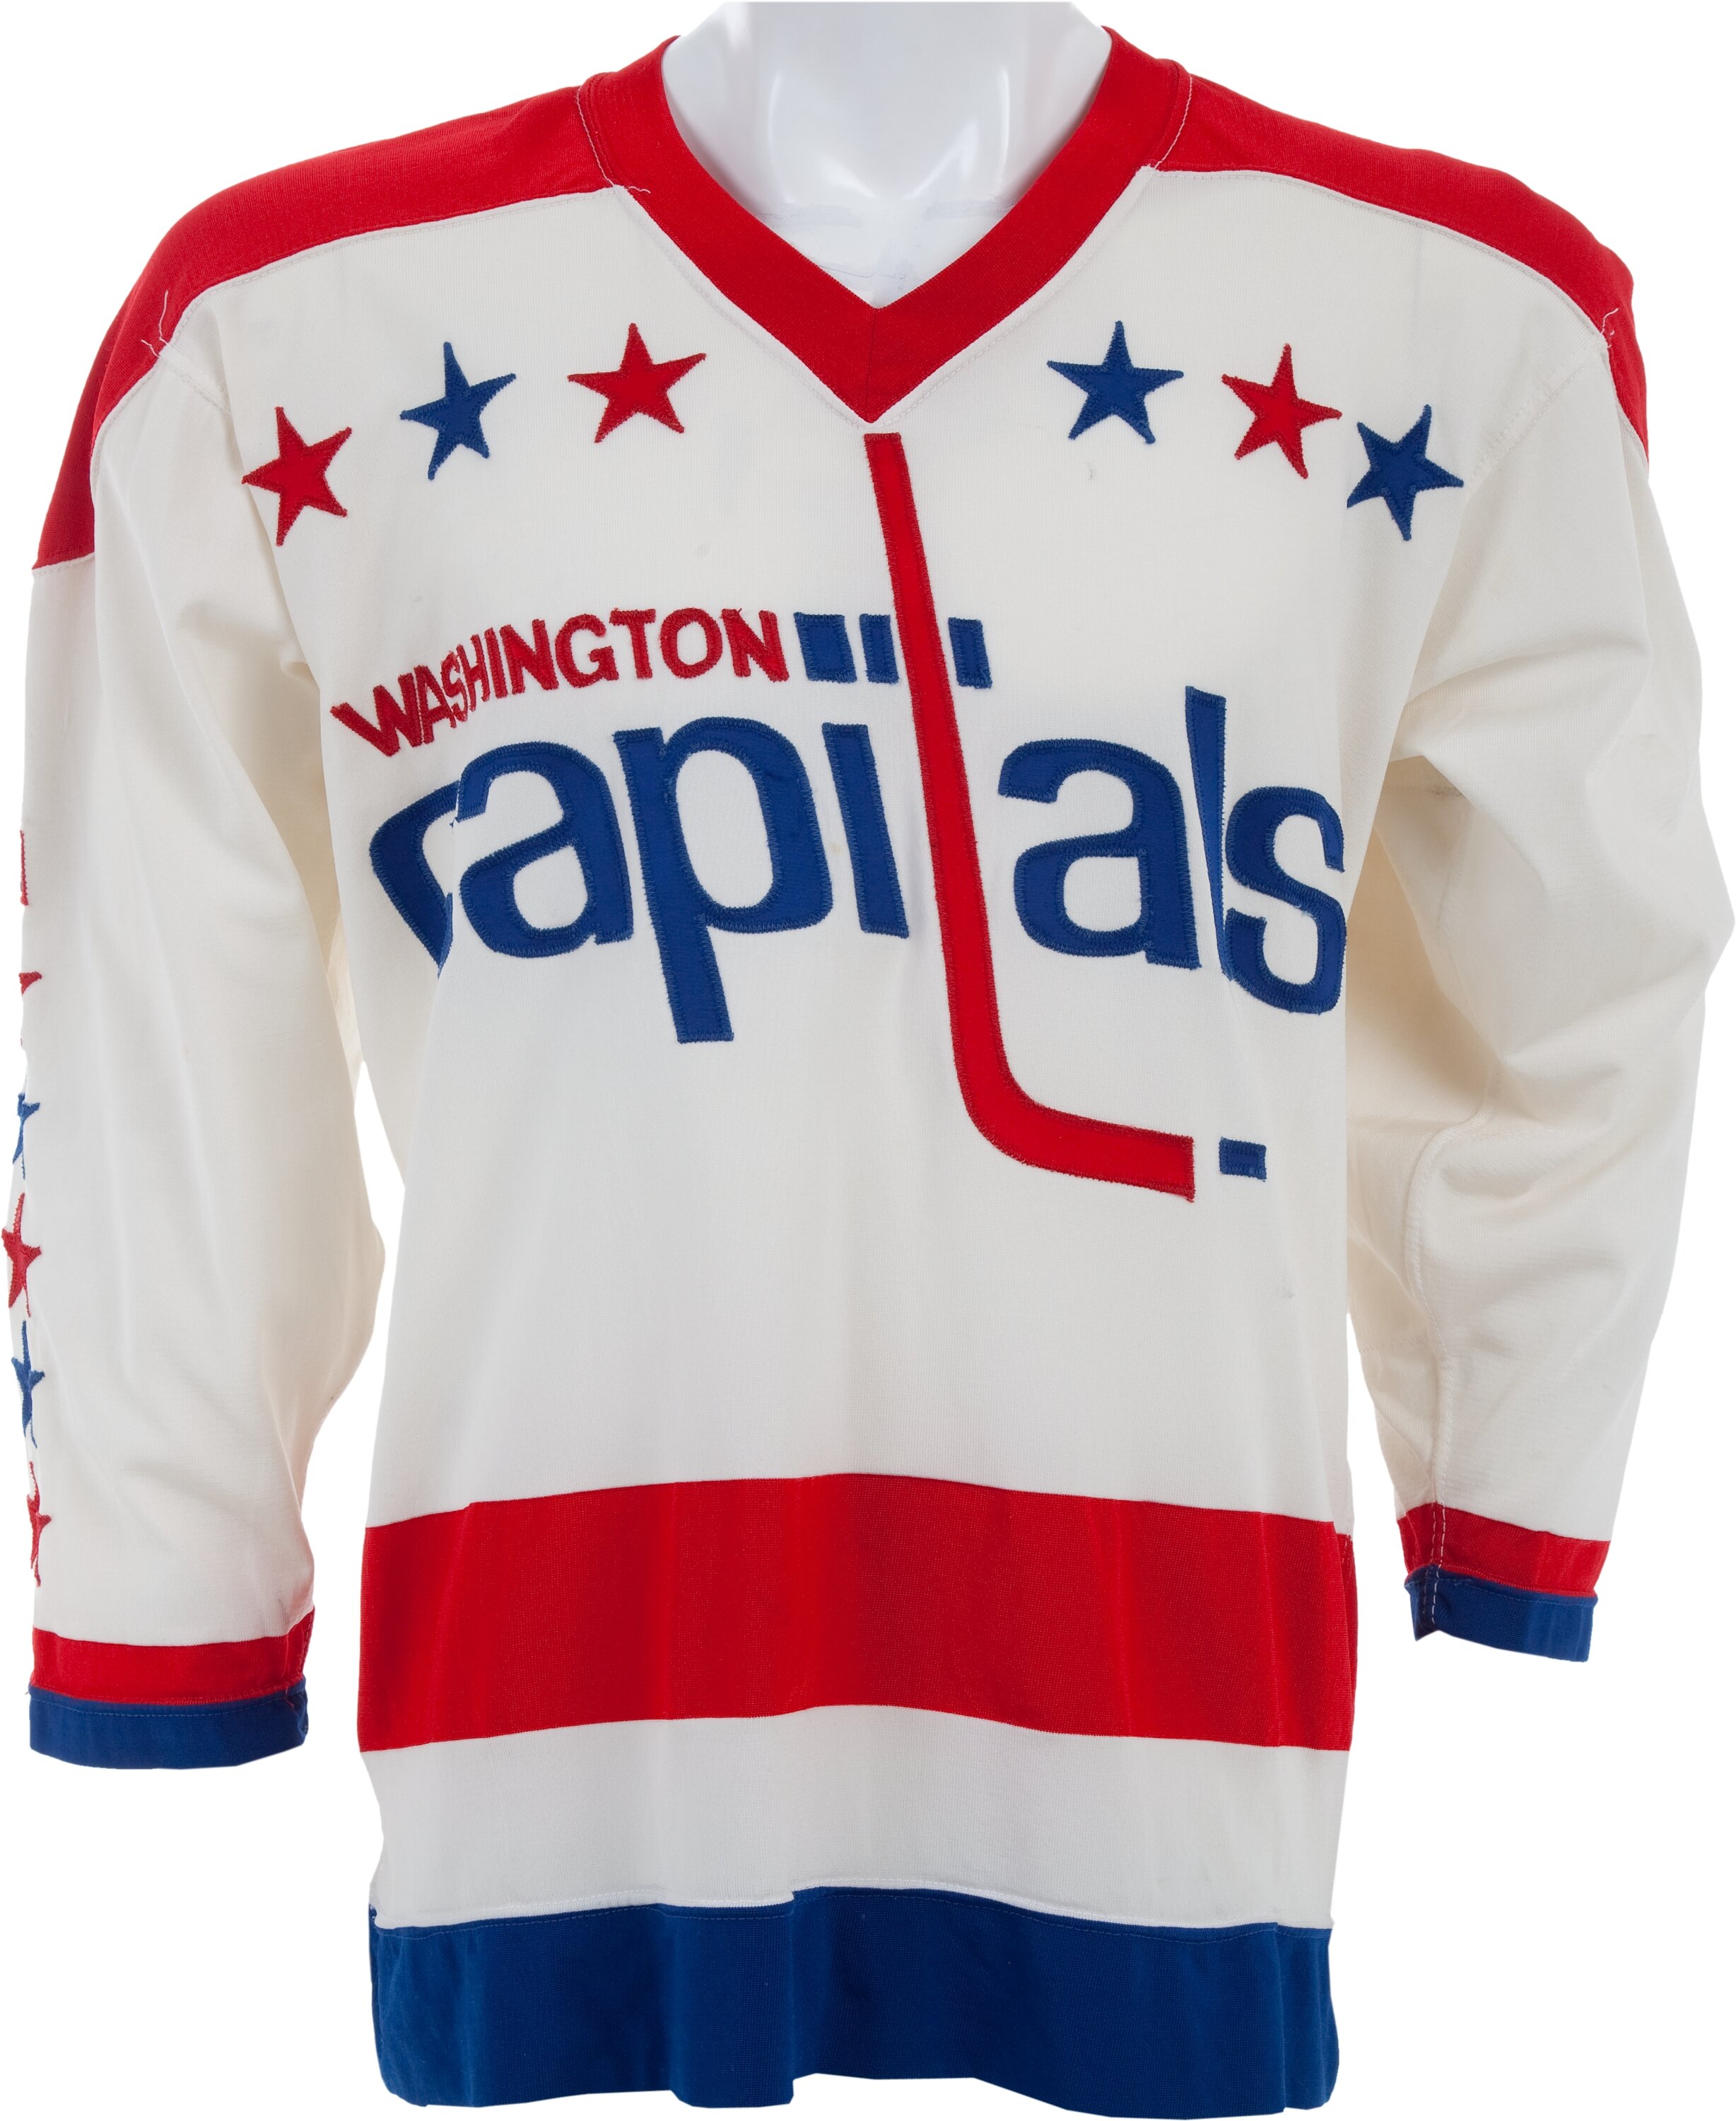 Mid 1970's Ron Low Game Issued Washington Capitals Jersey., Lot #82445